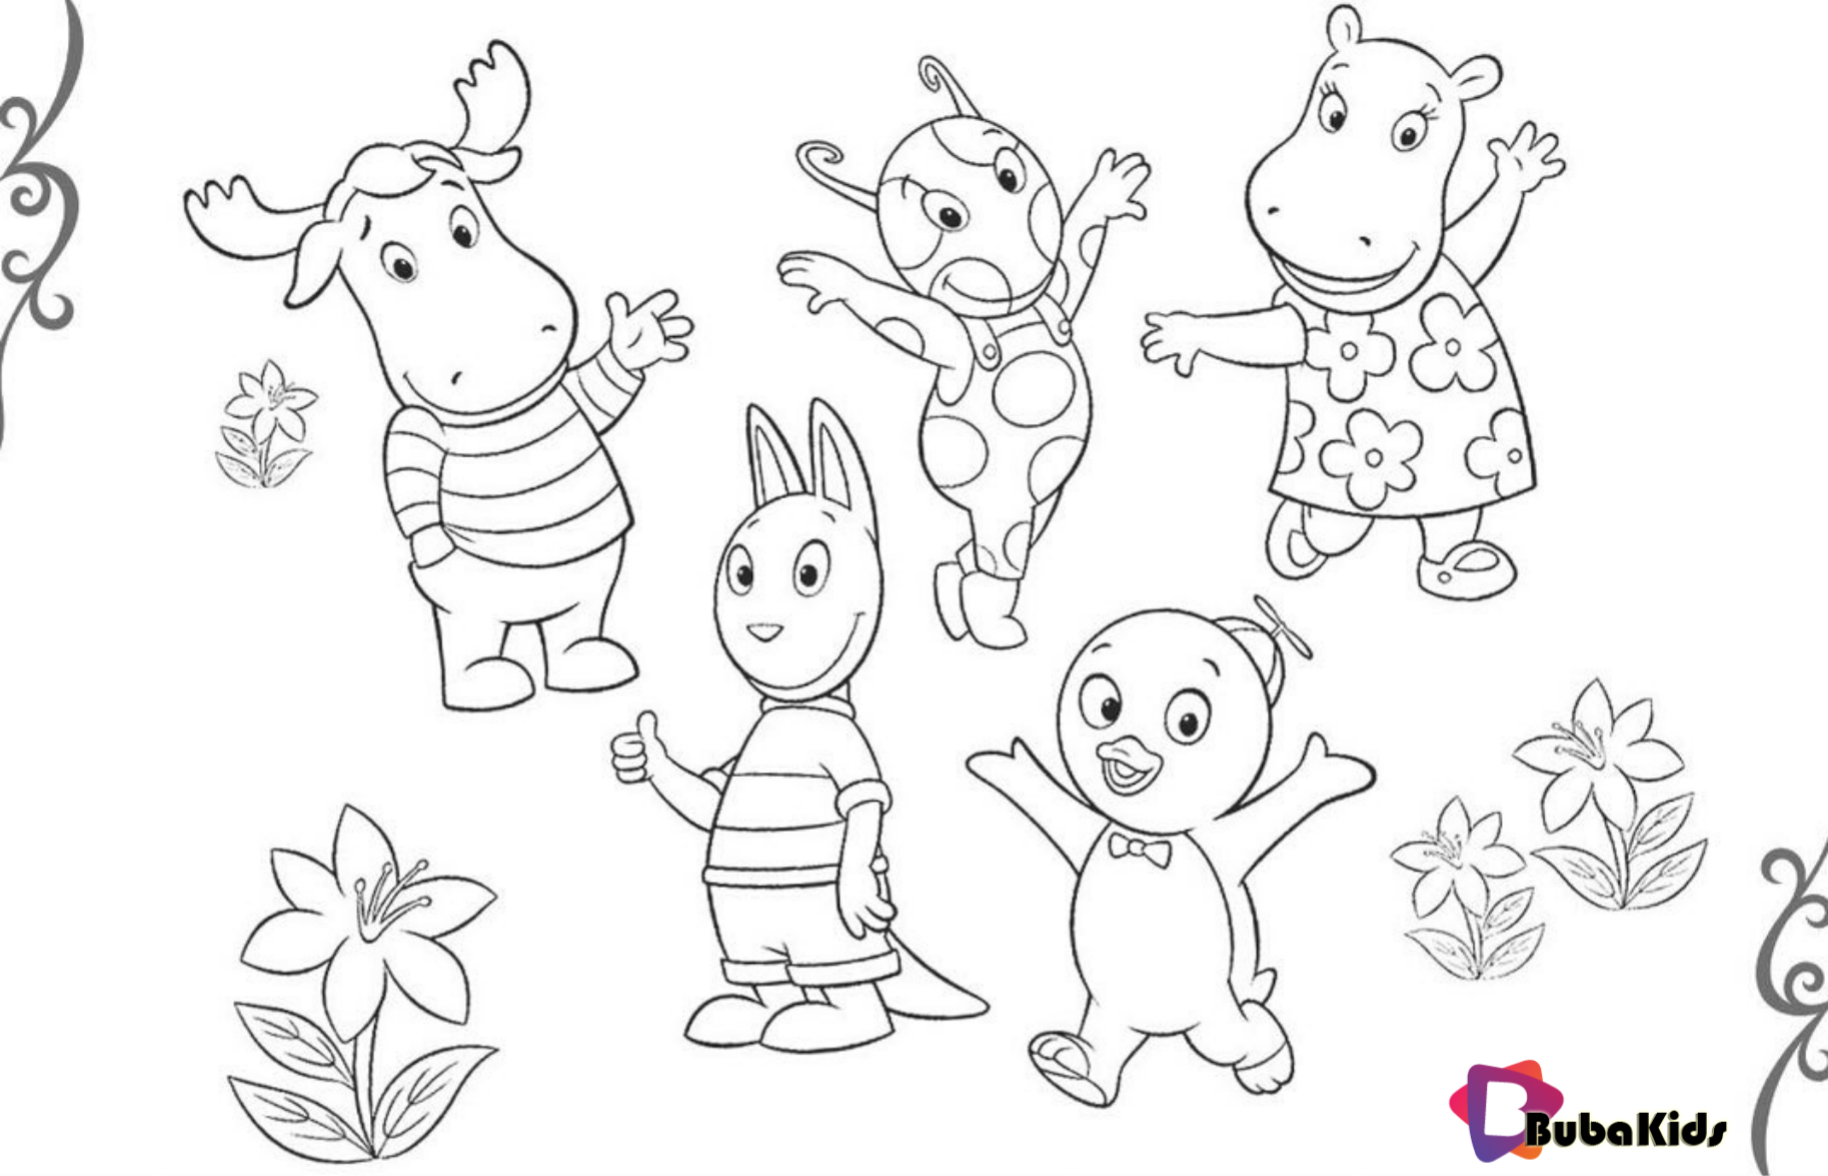 The Backyardigans Free printable coloring pages for children